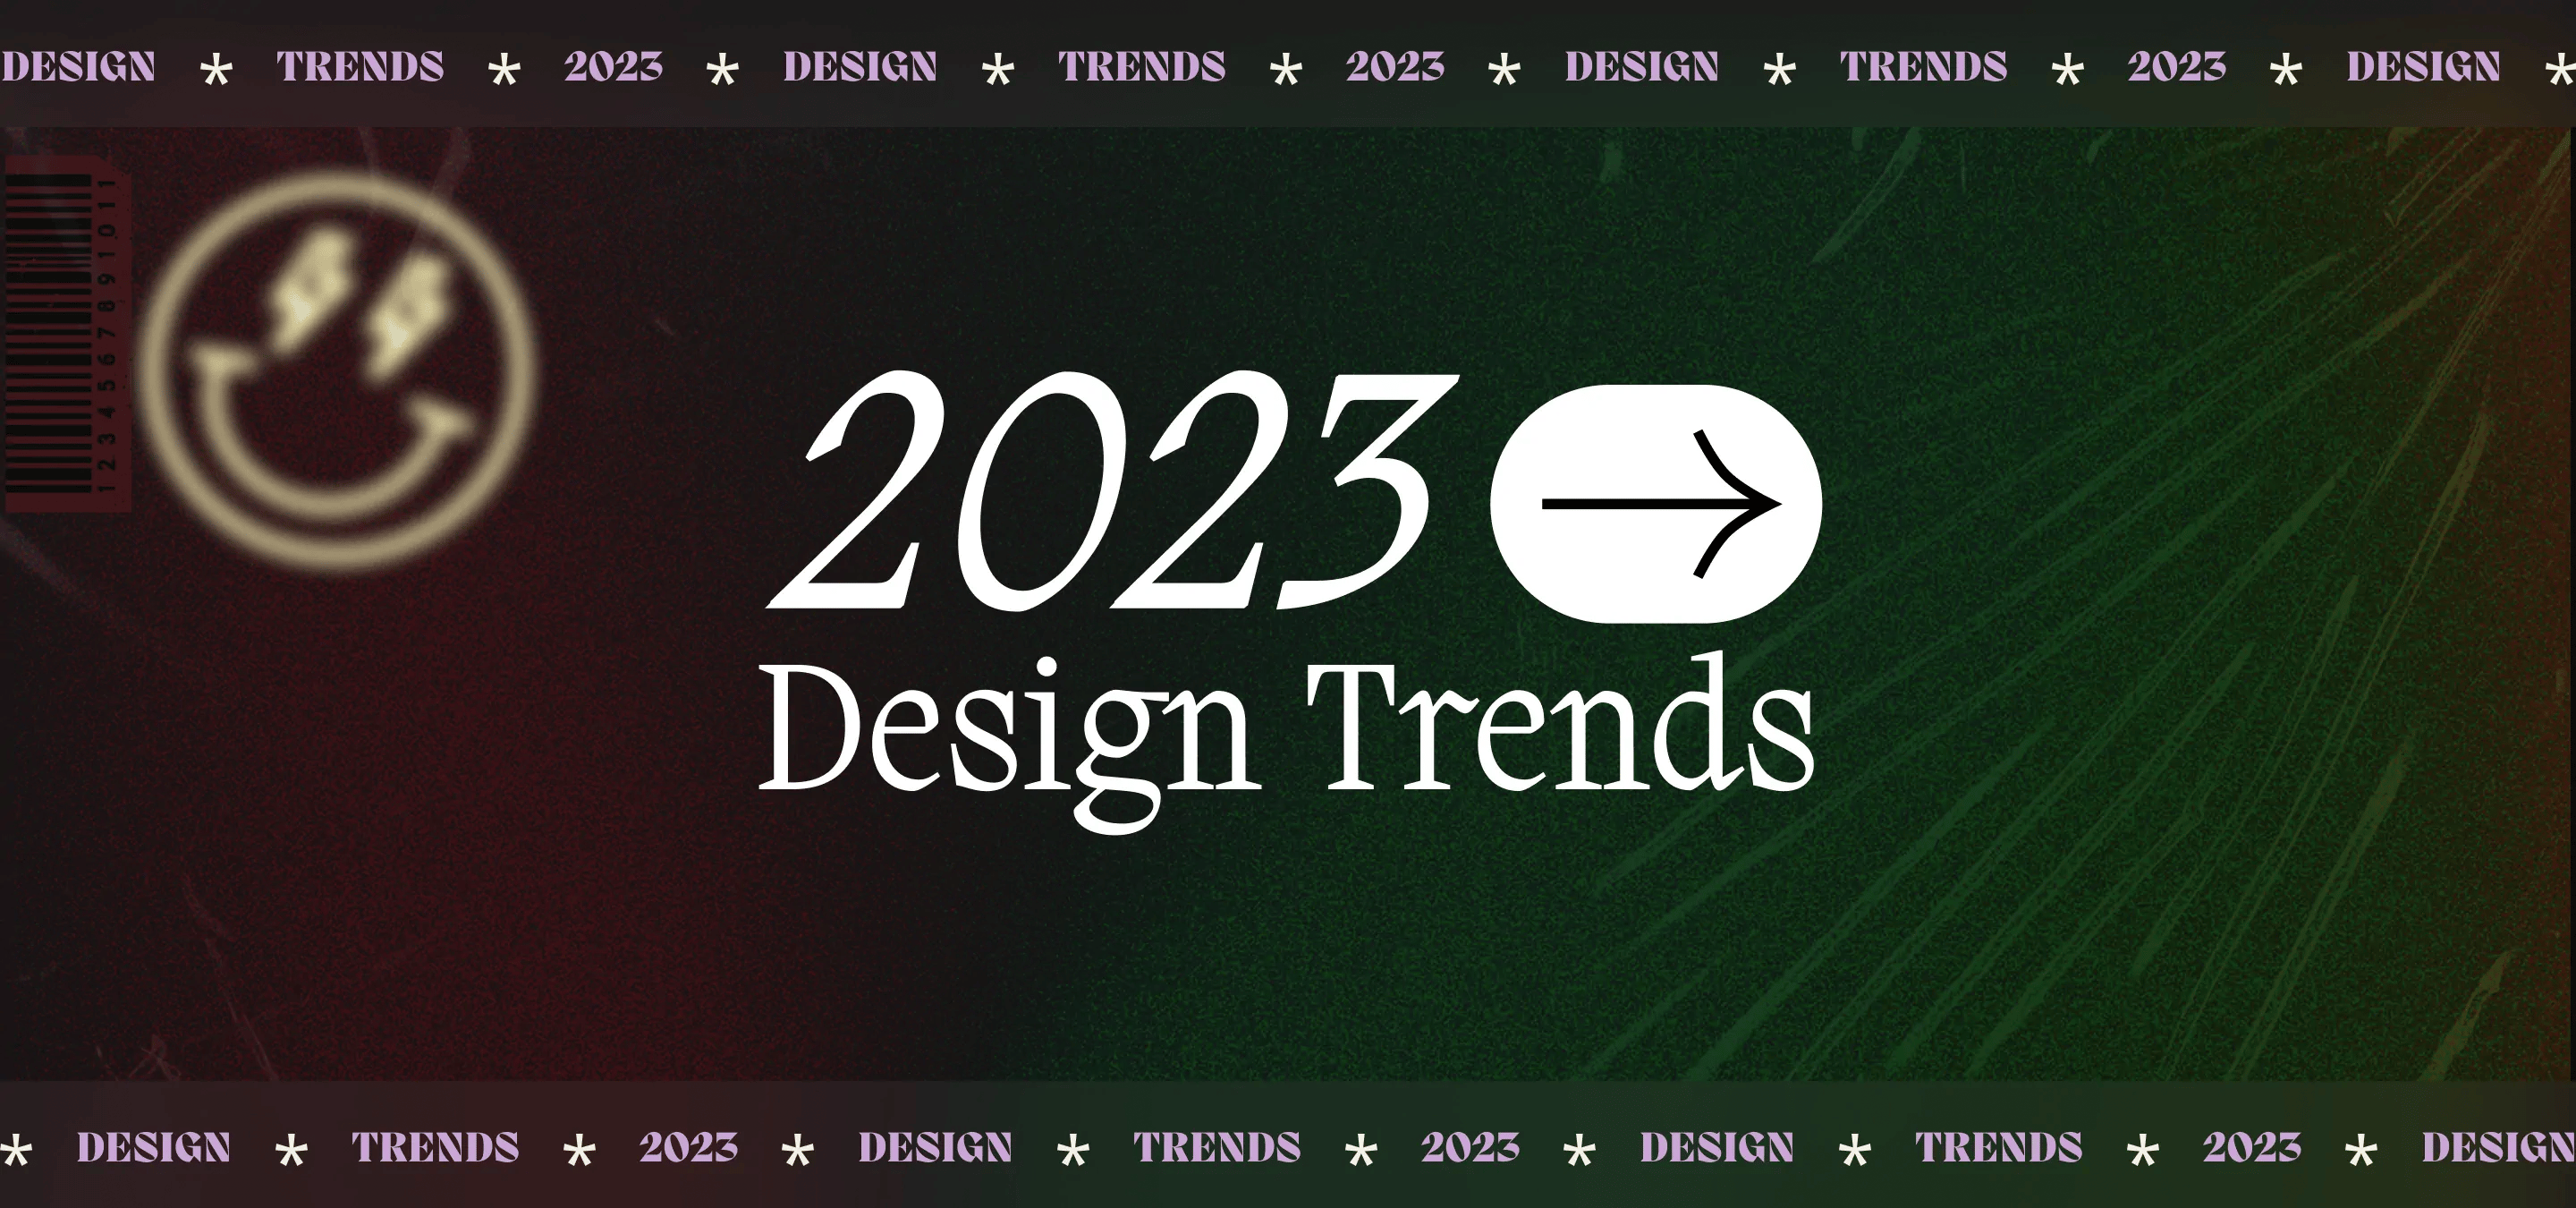 Stay Ahead of the Game: The Top Web Design Trends for 2023